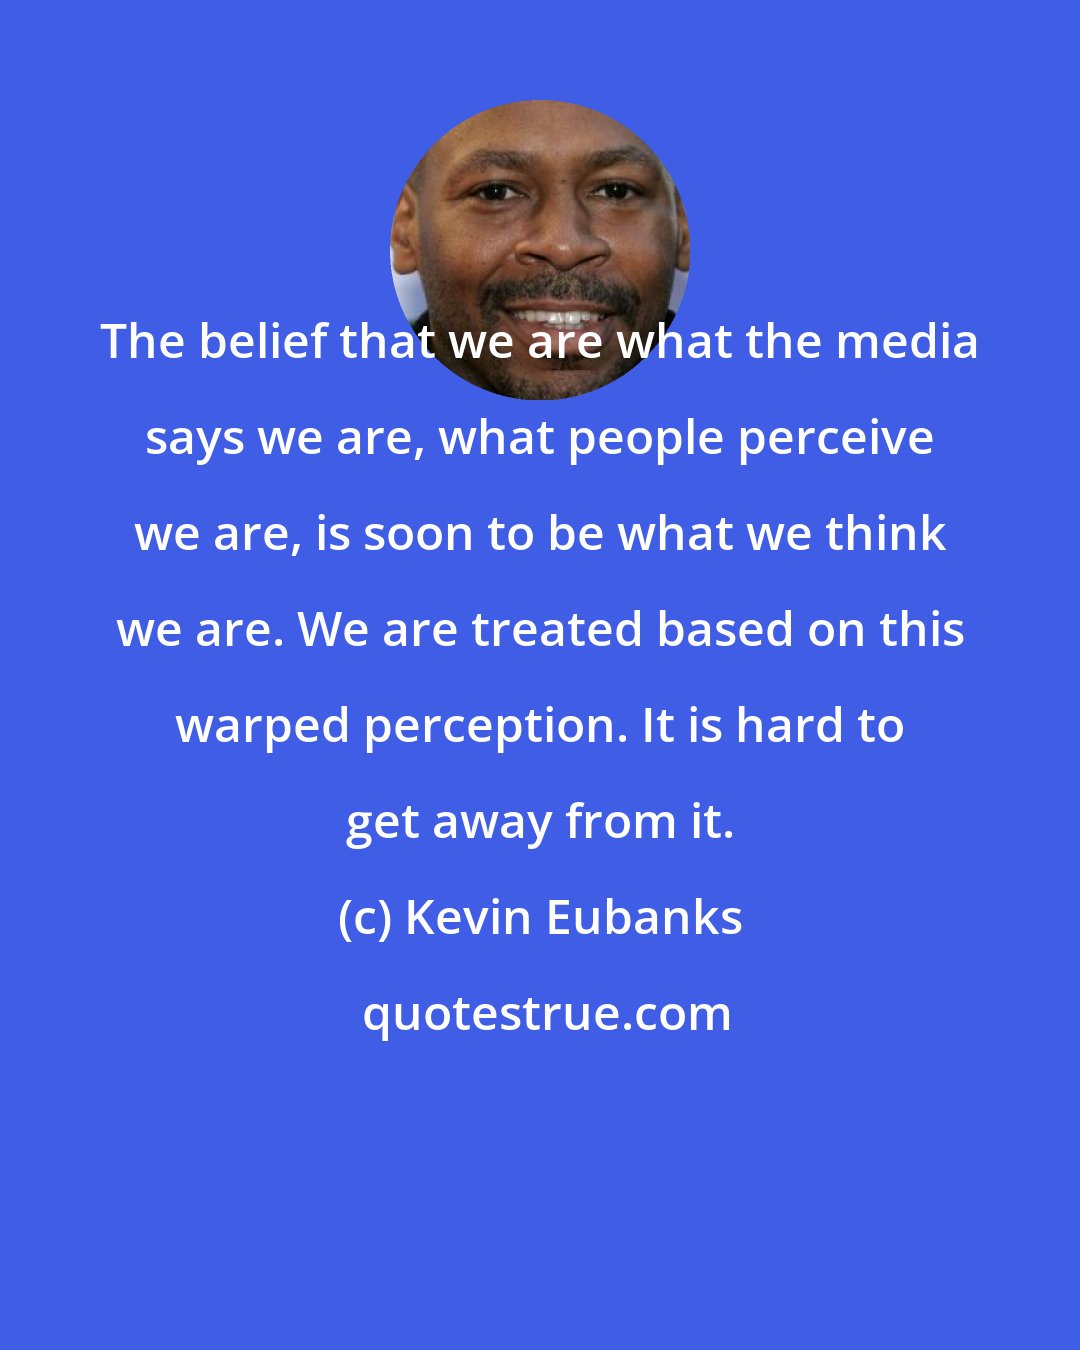 Kevin Eubanks: The belief that we are what the media says we are, what people perceive we are, is soon to be what we think we are. We are treated based on this warped perception. It is hard to get away from it.